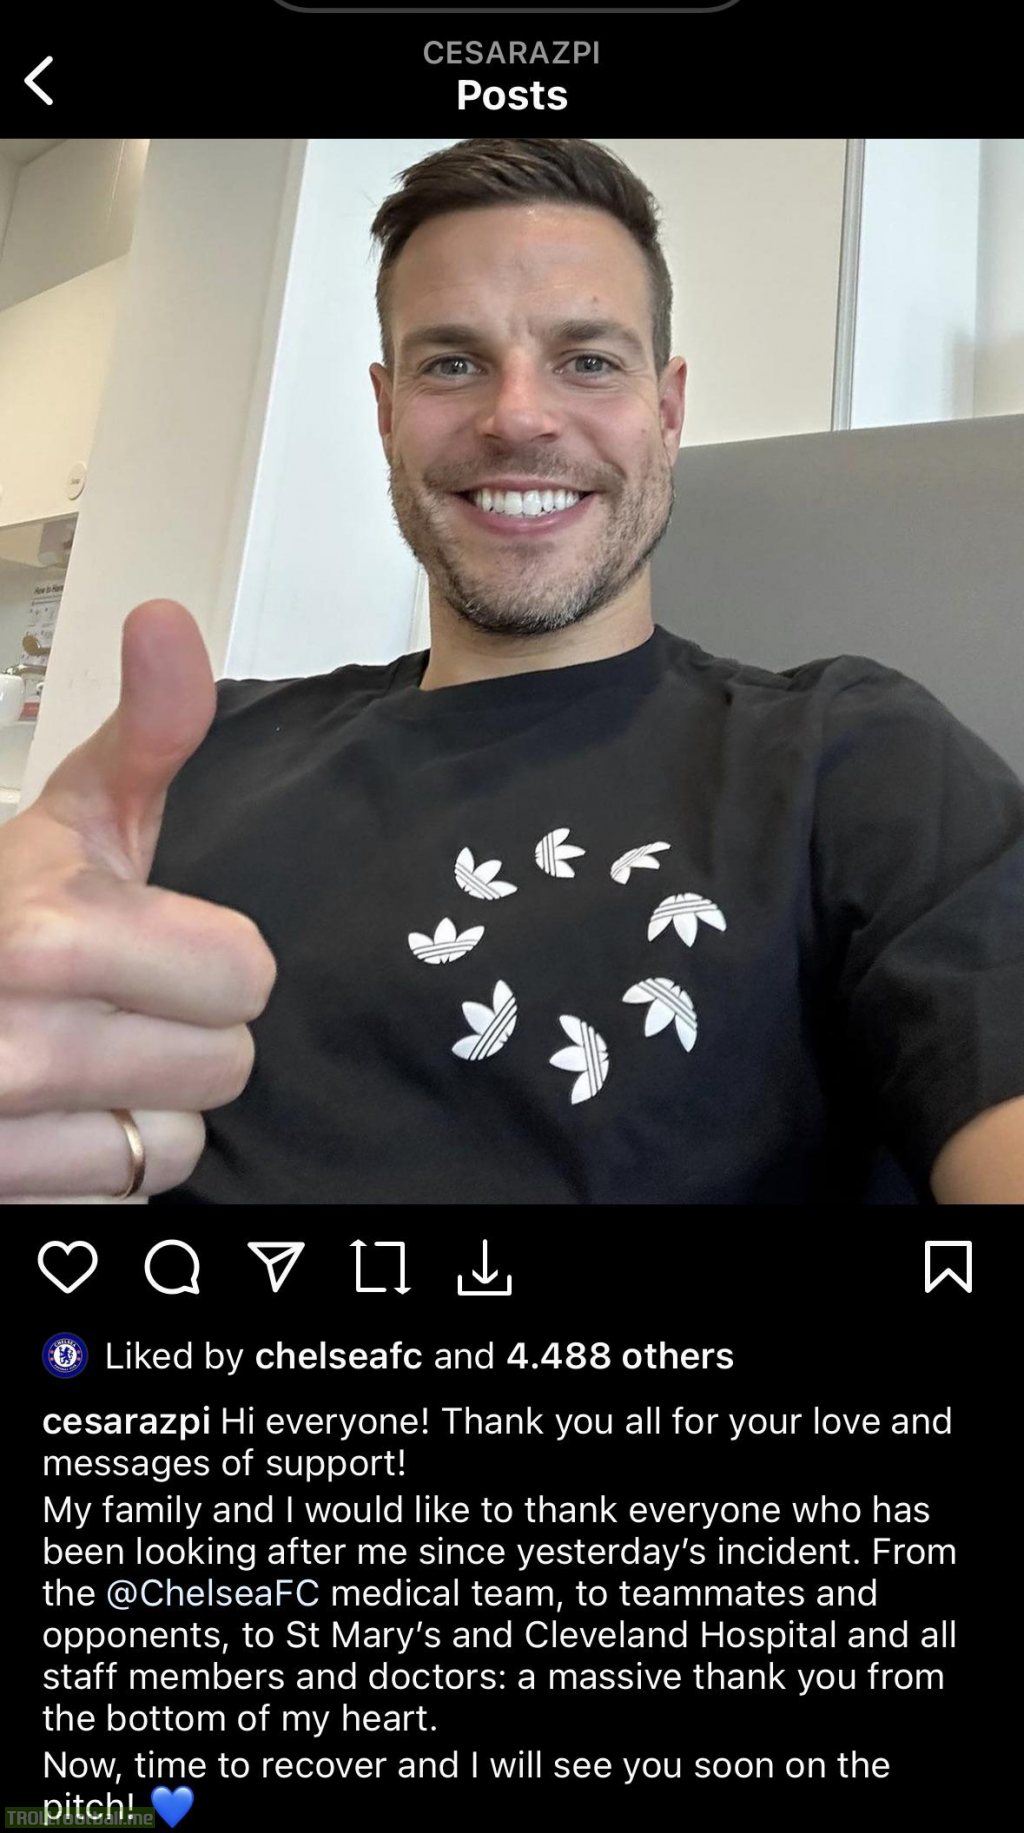 Azpilicueta on Instagram with an update after yesterdays incident: Hi everyone! Thank you all for your love and messages of support! My family and I would like to thank everyone who has been looking after me since yesterday’s incident…